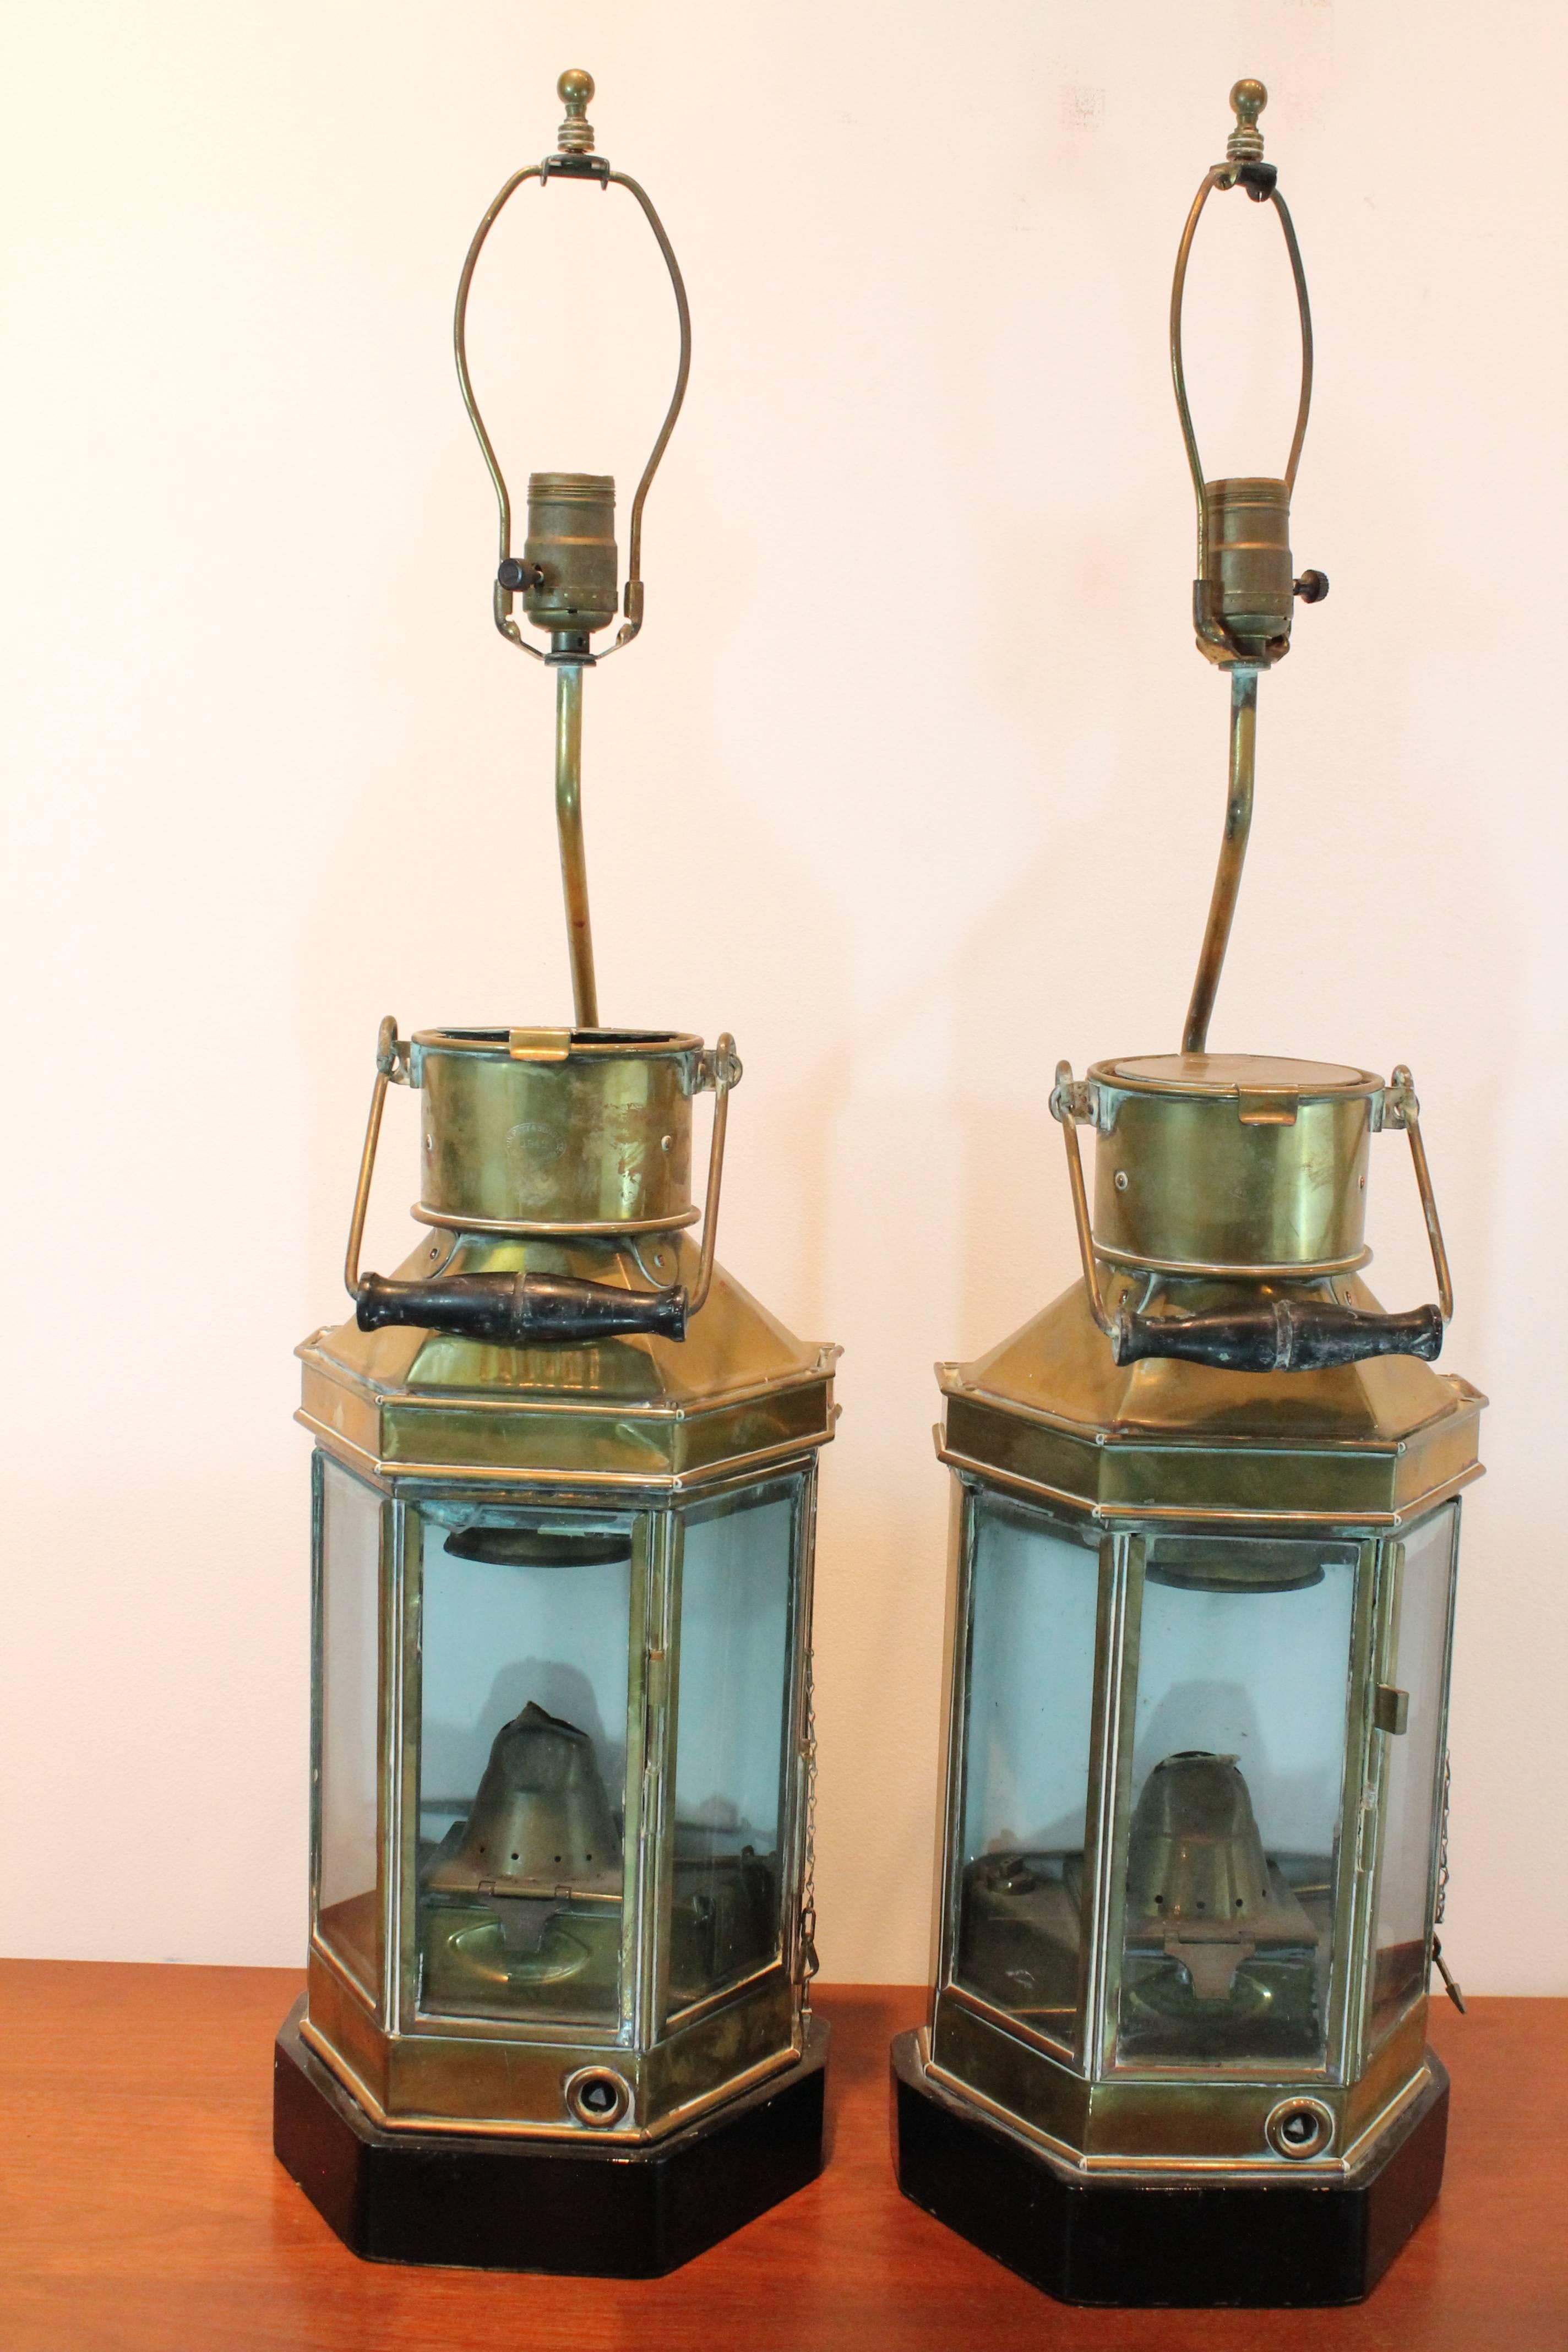 Pair of Brass Ship Lantern Lamps In Good Condition For Sale In 3 Oaks, MI